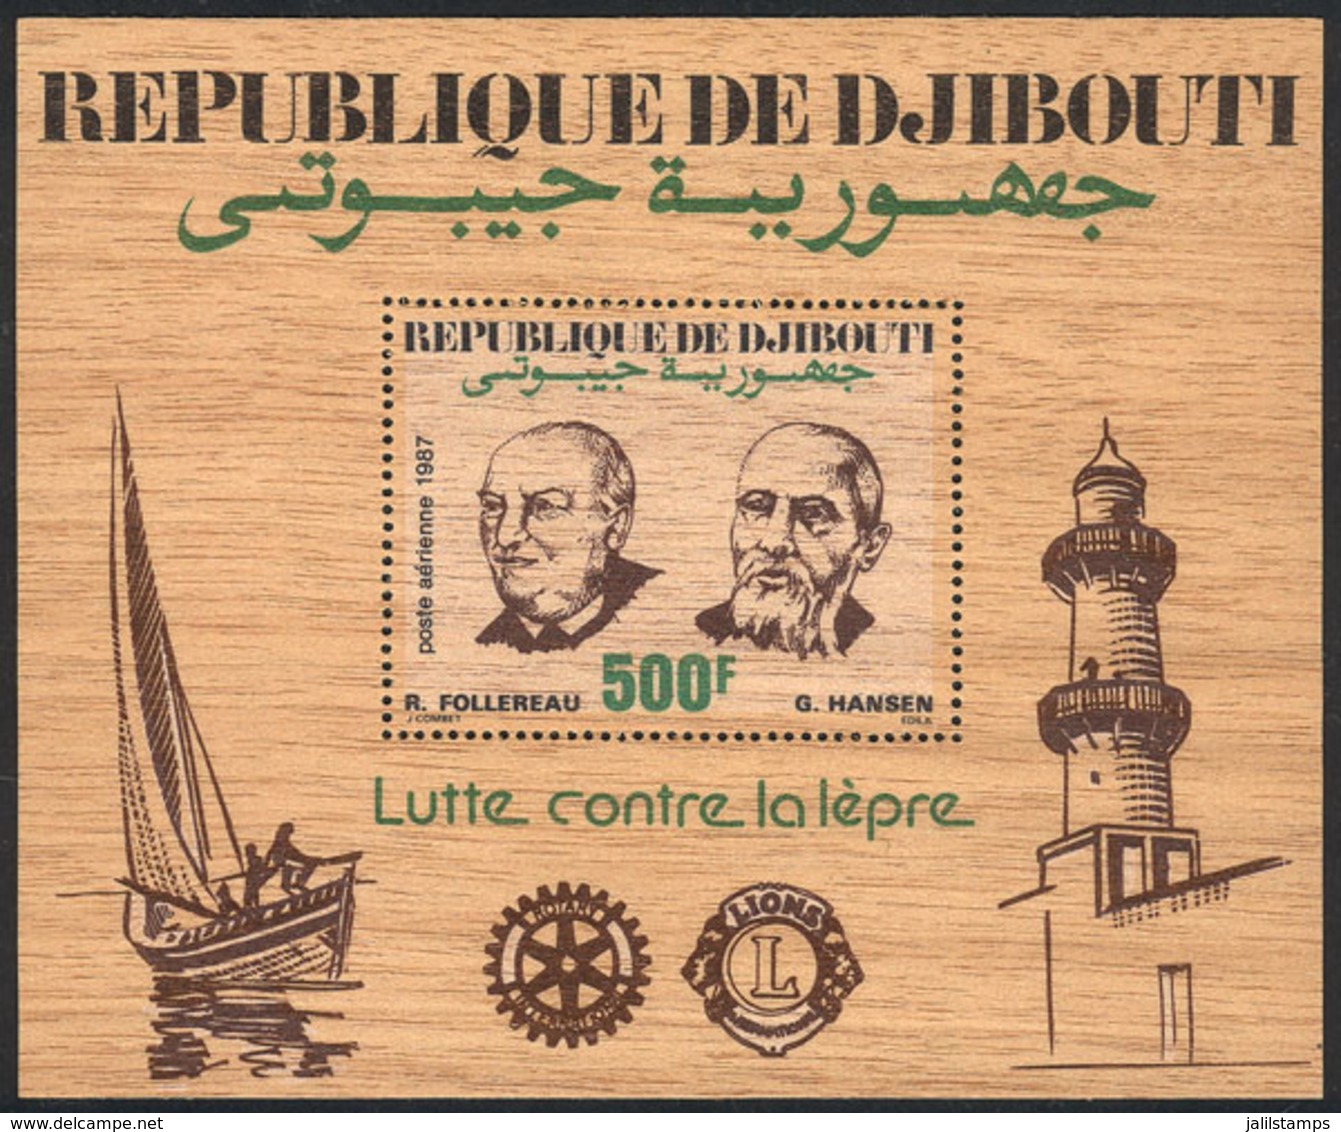 DJIBOUTI: Sc.C231A, Fight Against Leprosy, Medicine, Lions Club, Rotary, Boat, Lighthouse, Souvenir Sheet PRINTED ON WOO - Djibouti (1977-...)